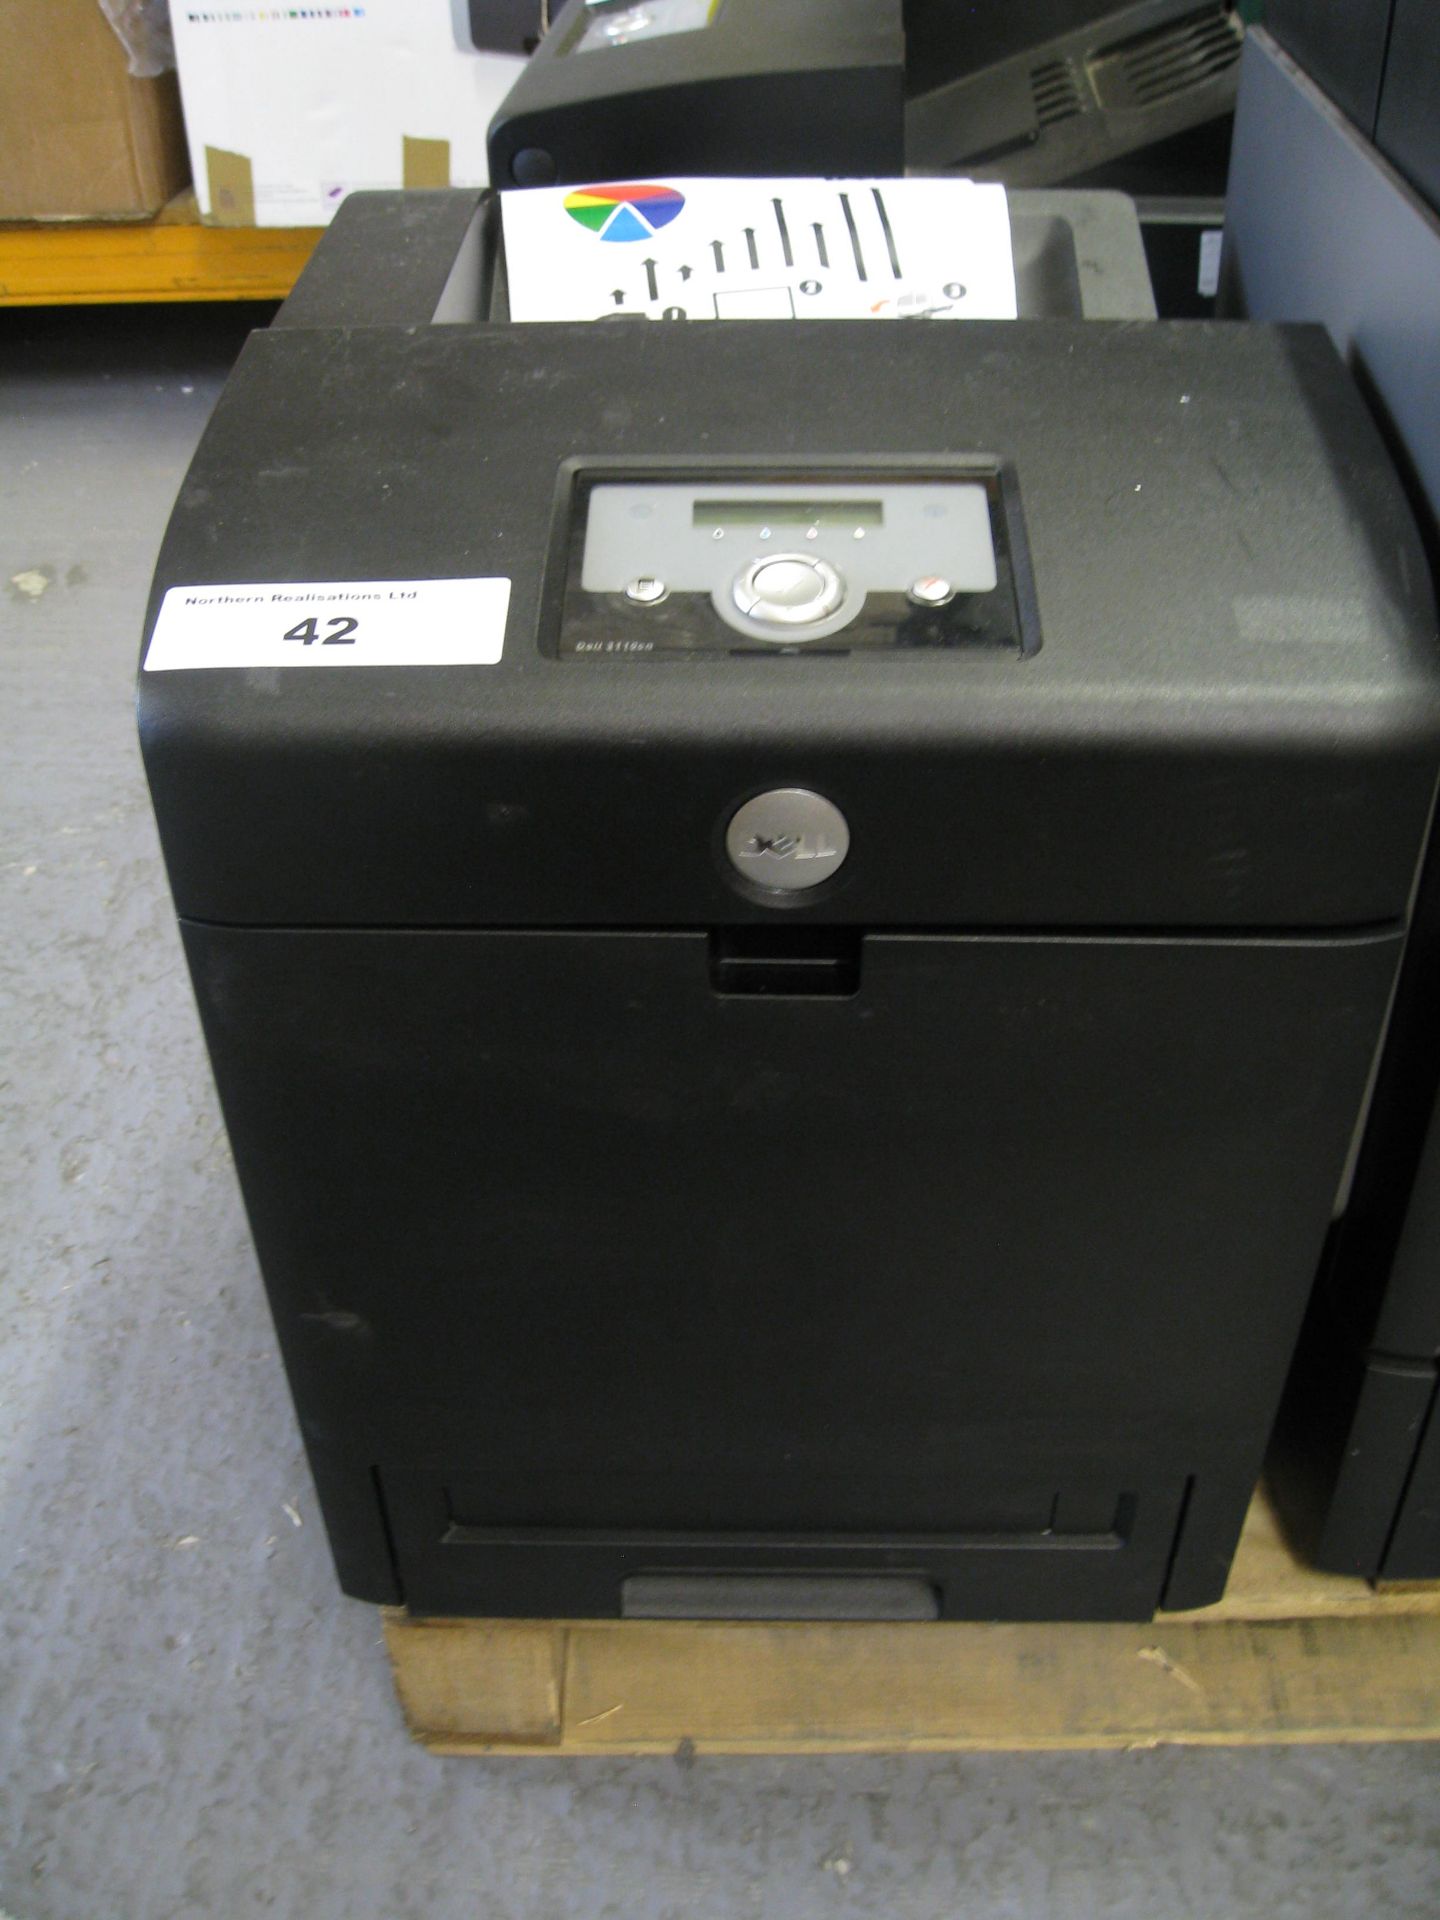 DELL COLOUR LASER PRINTER. MODEL 3110CN. WITH TEST PRINT